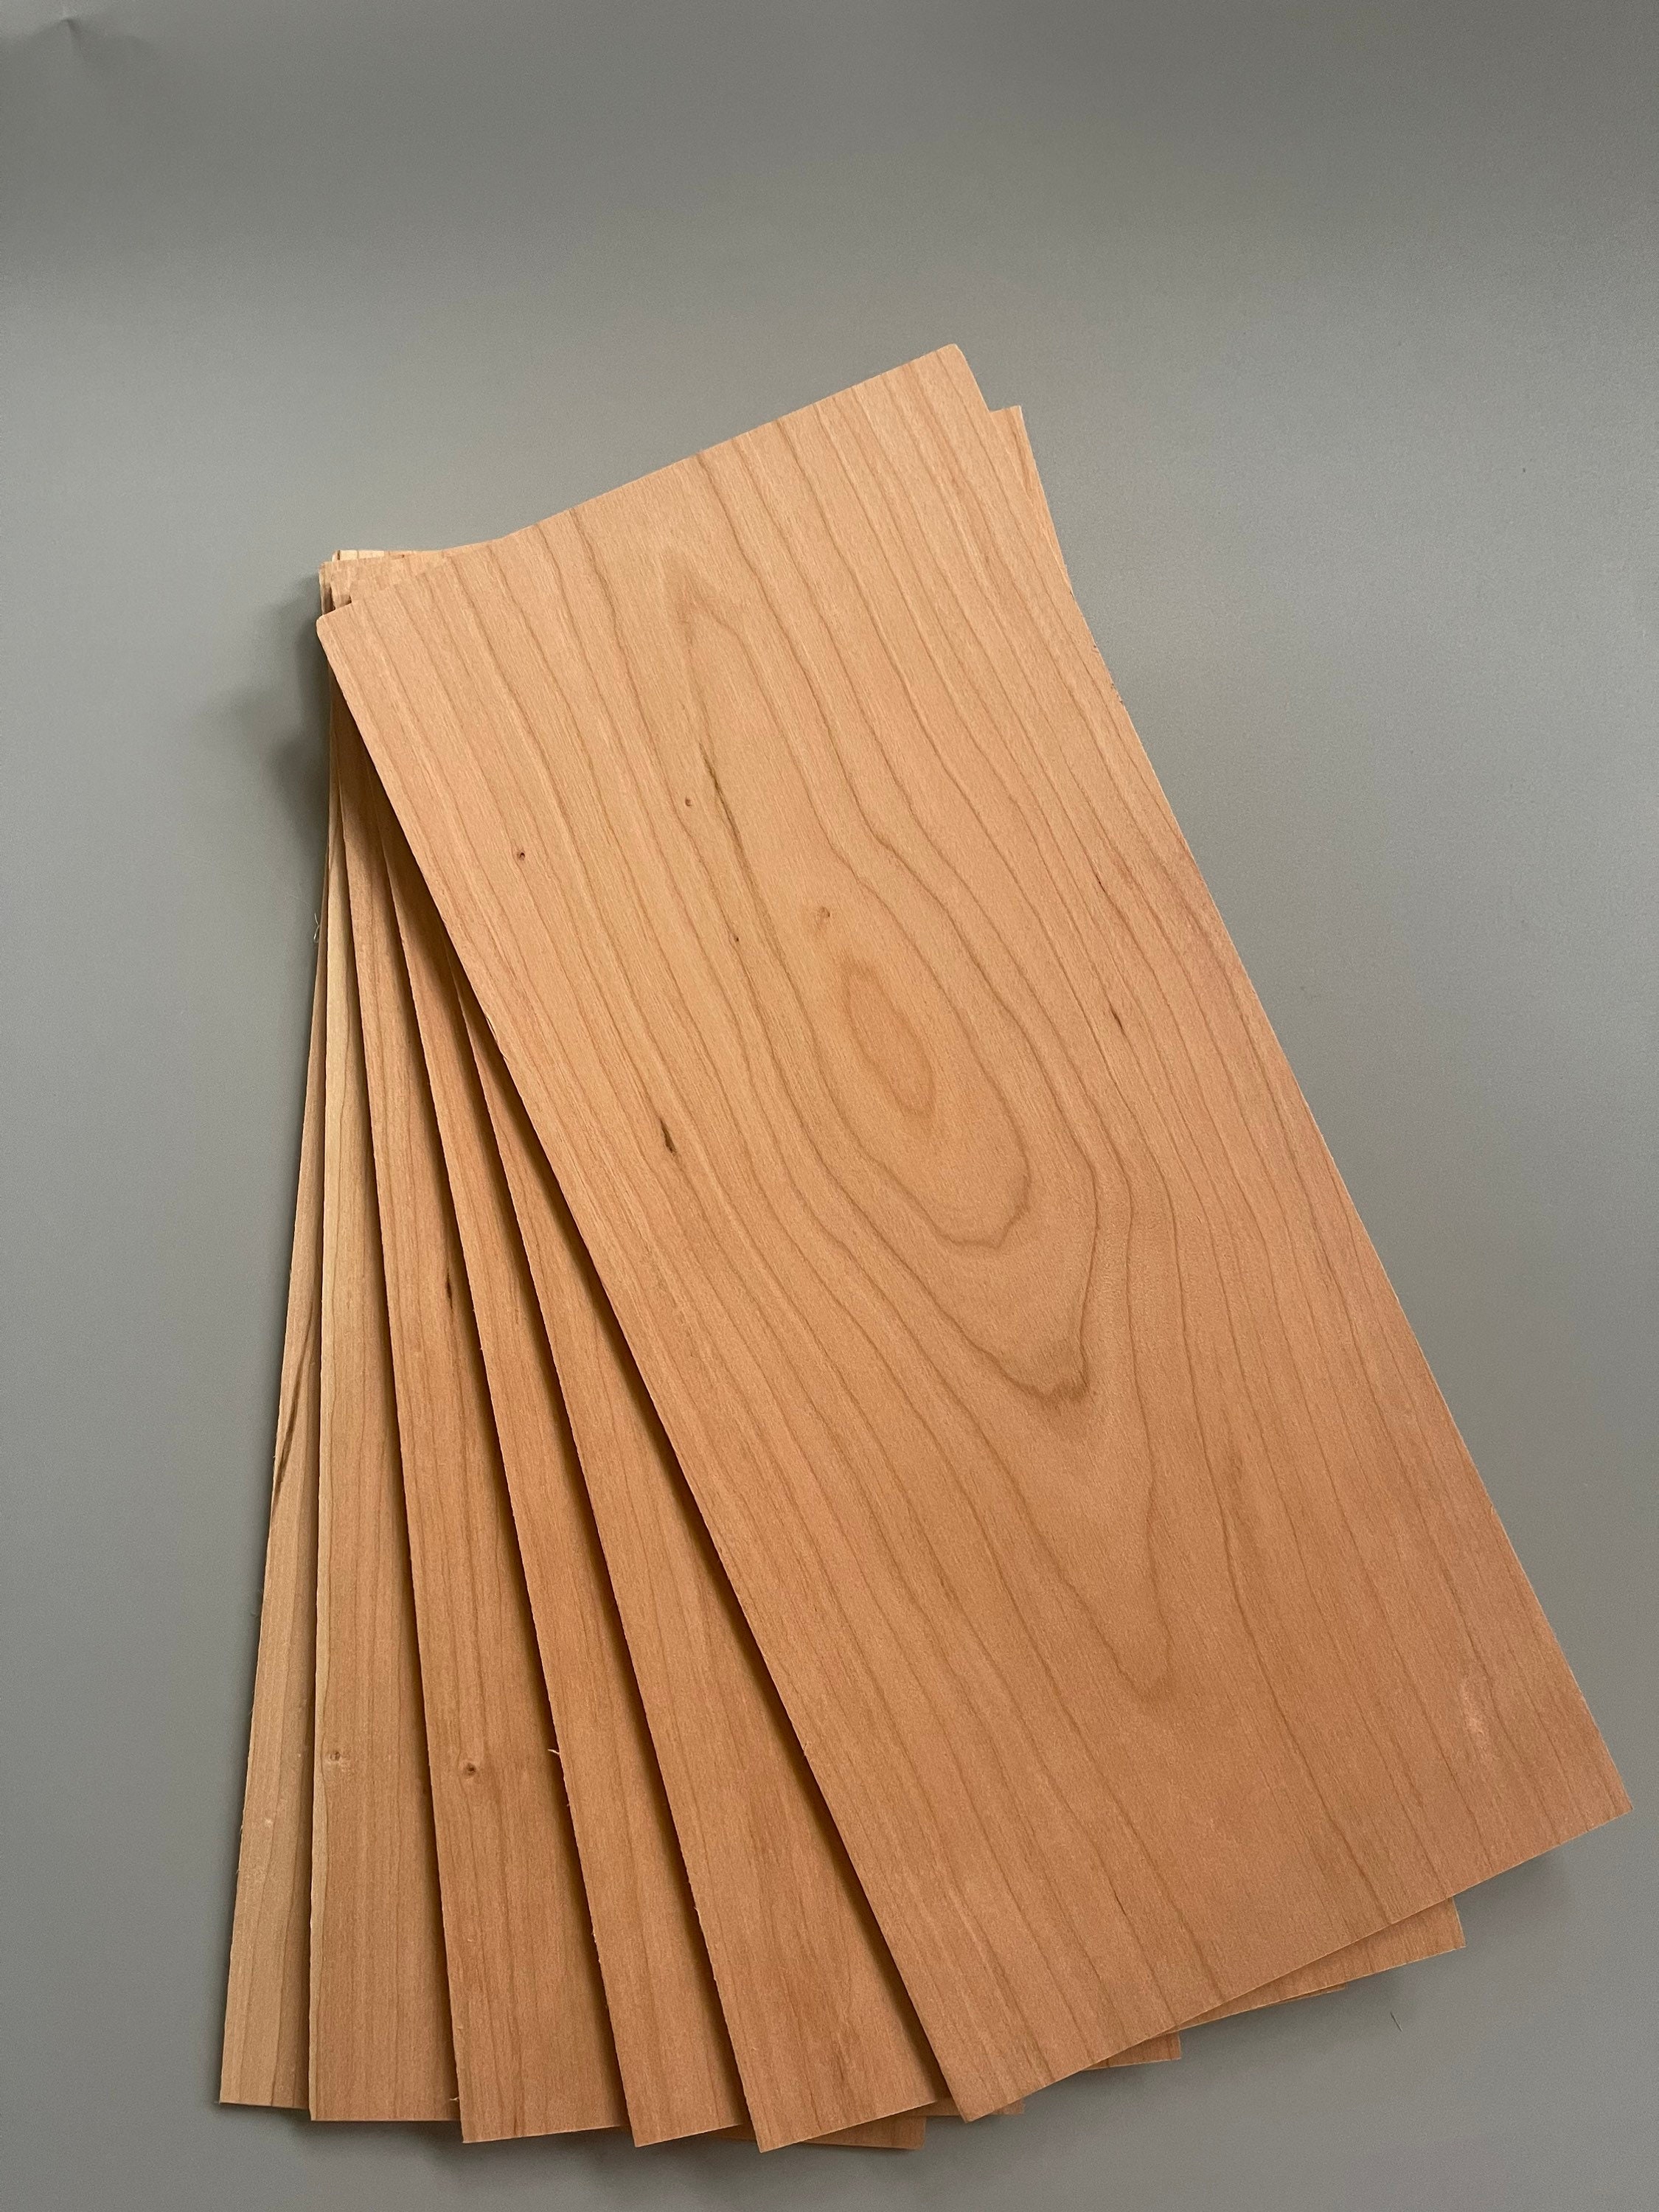 Premium Solid Cherry Wood Sheets, Sustainably Sourced, Sanded, and Planed